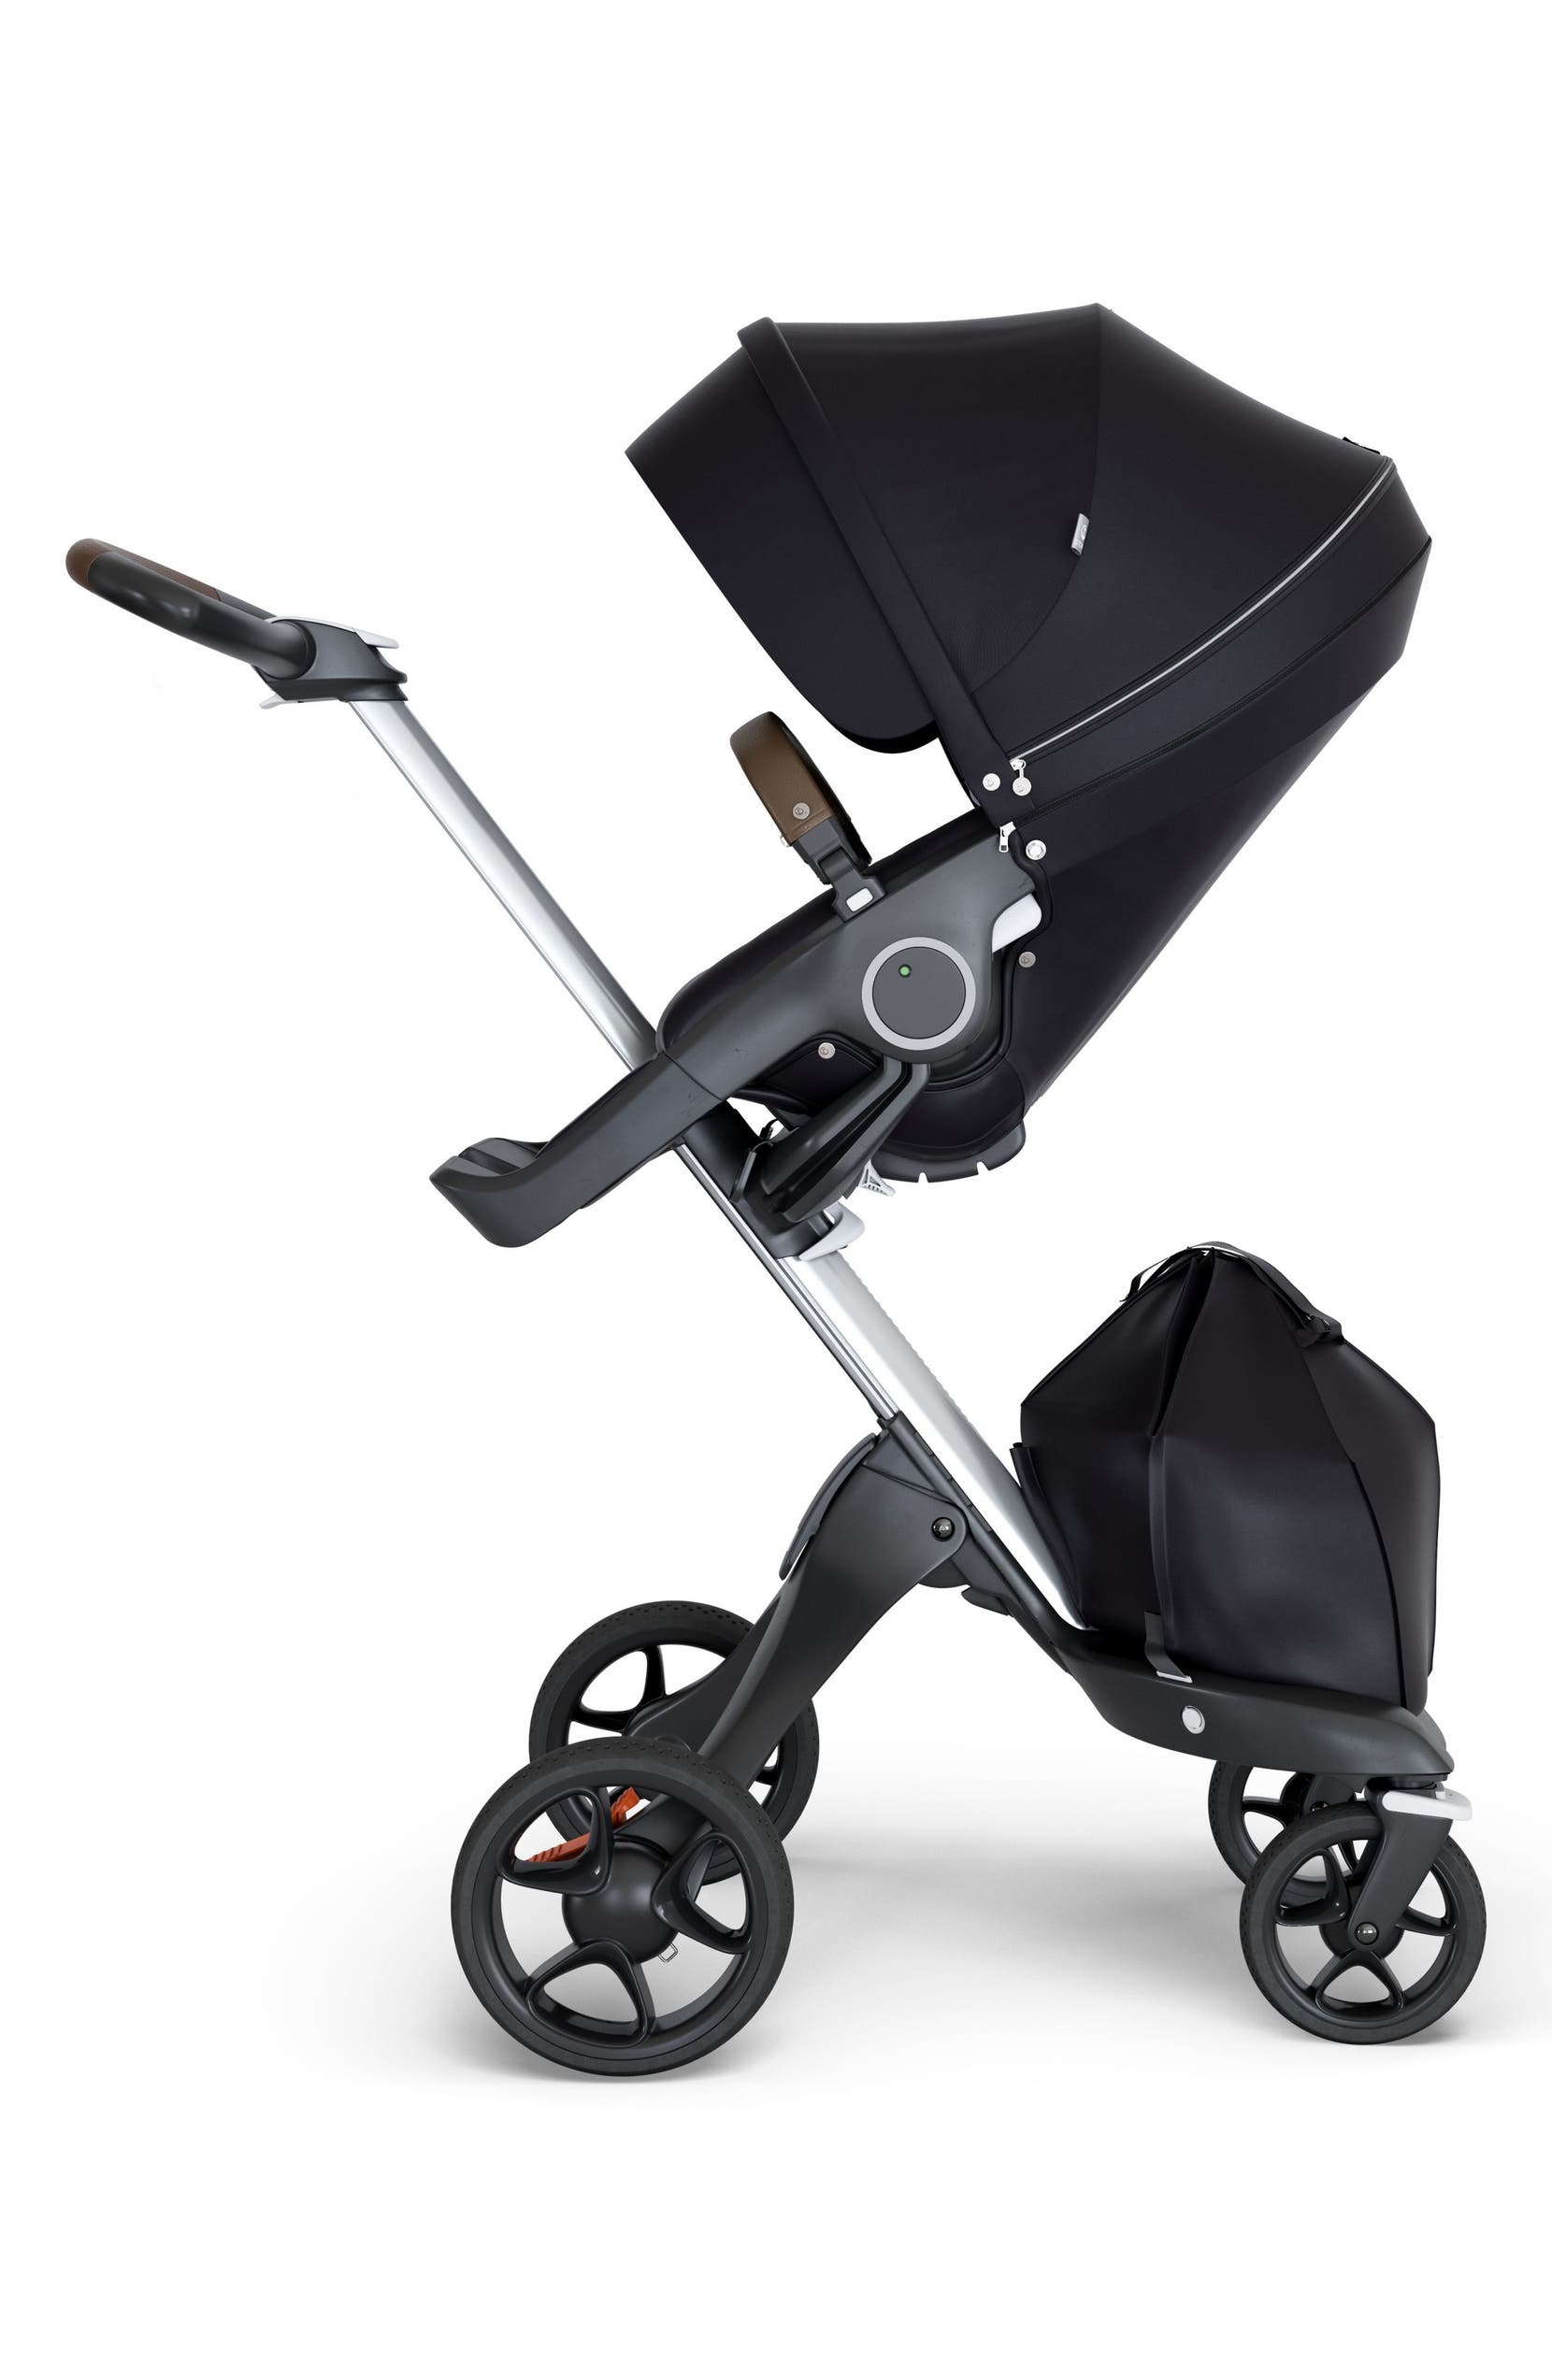  Xplory<sup>Â®</sup> Silver Chassis Stroller, Main, color, BLACK